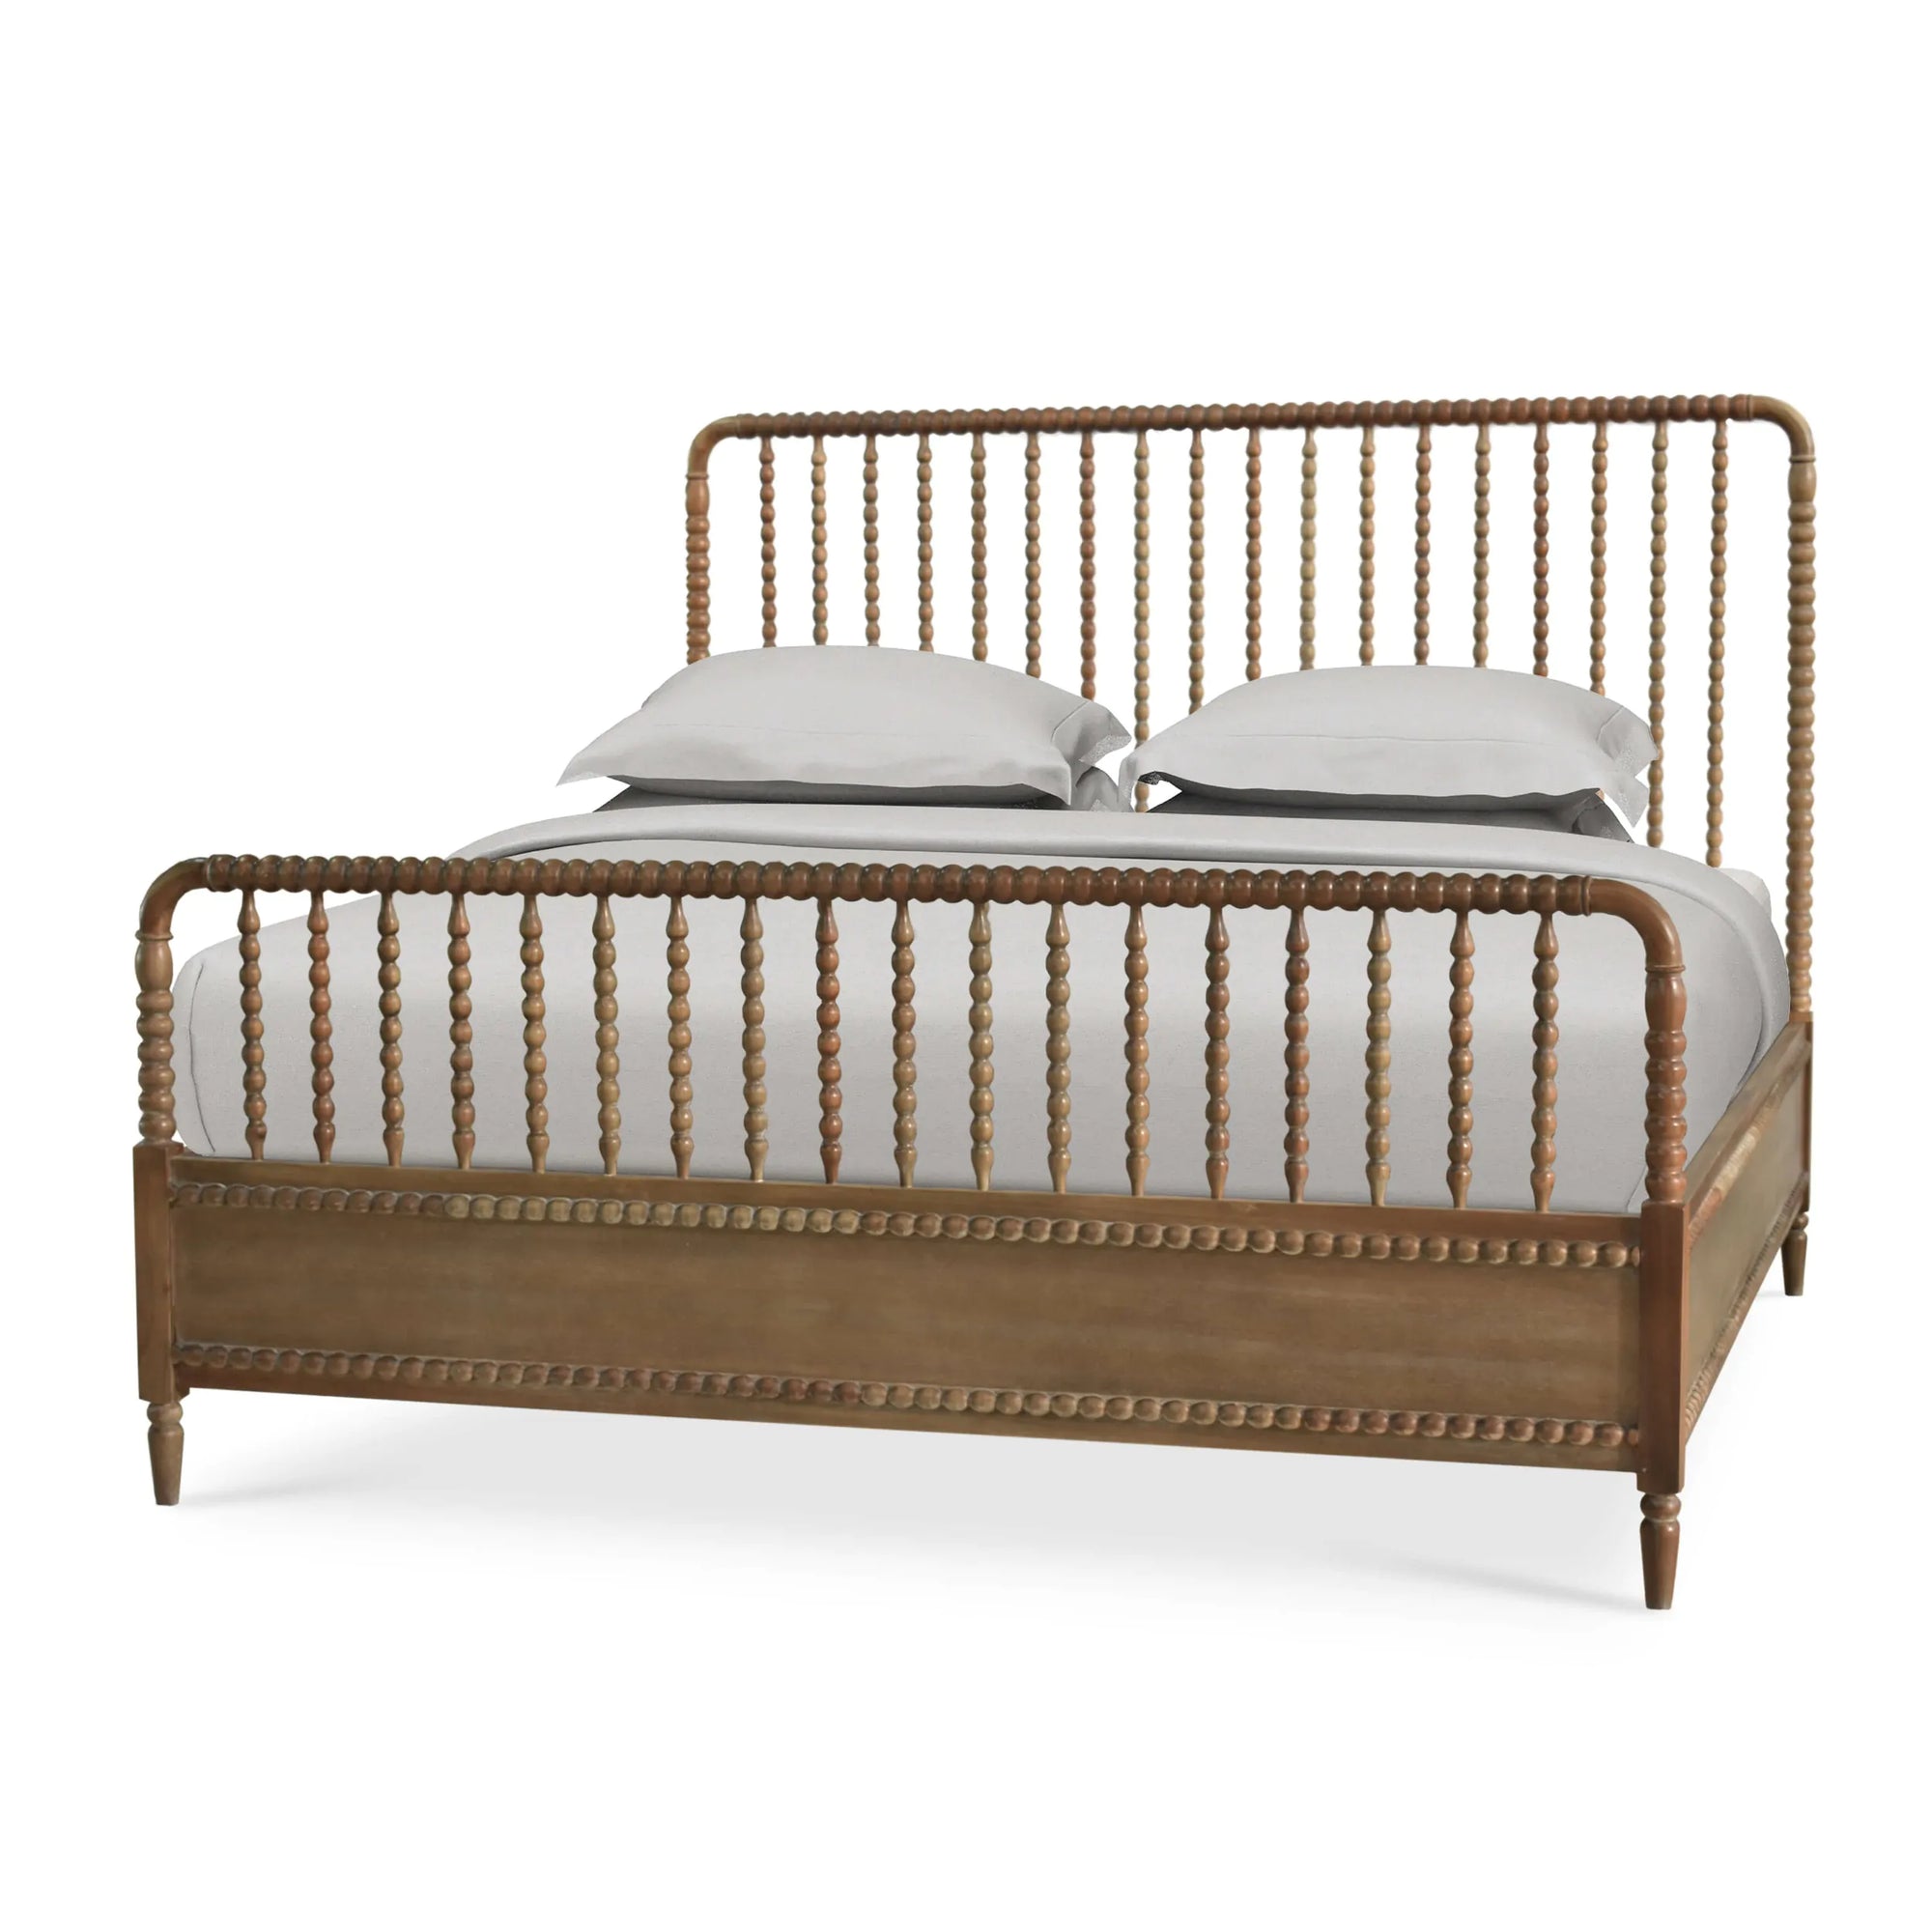 Cholet Bed King Straw Wash